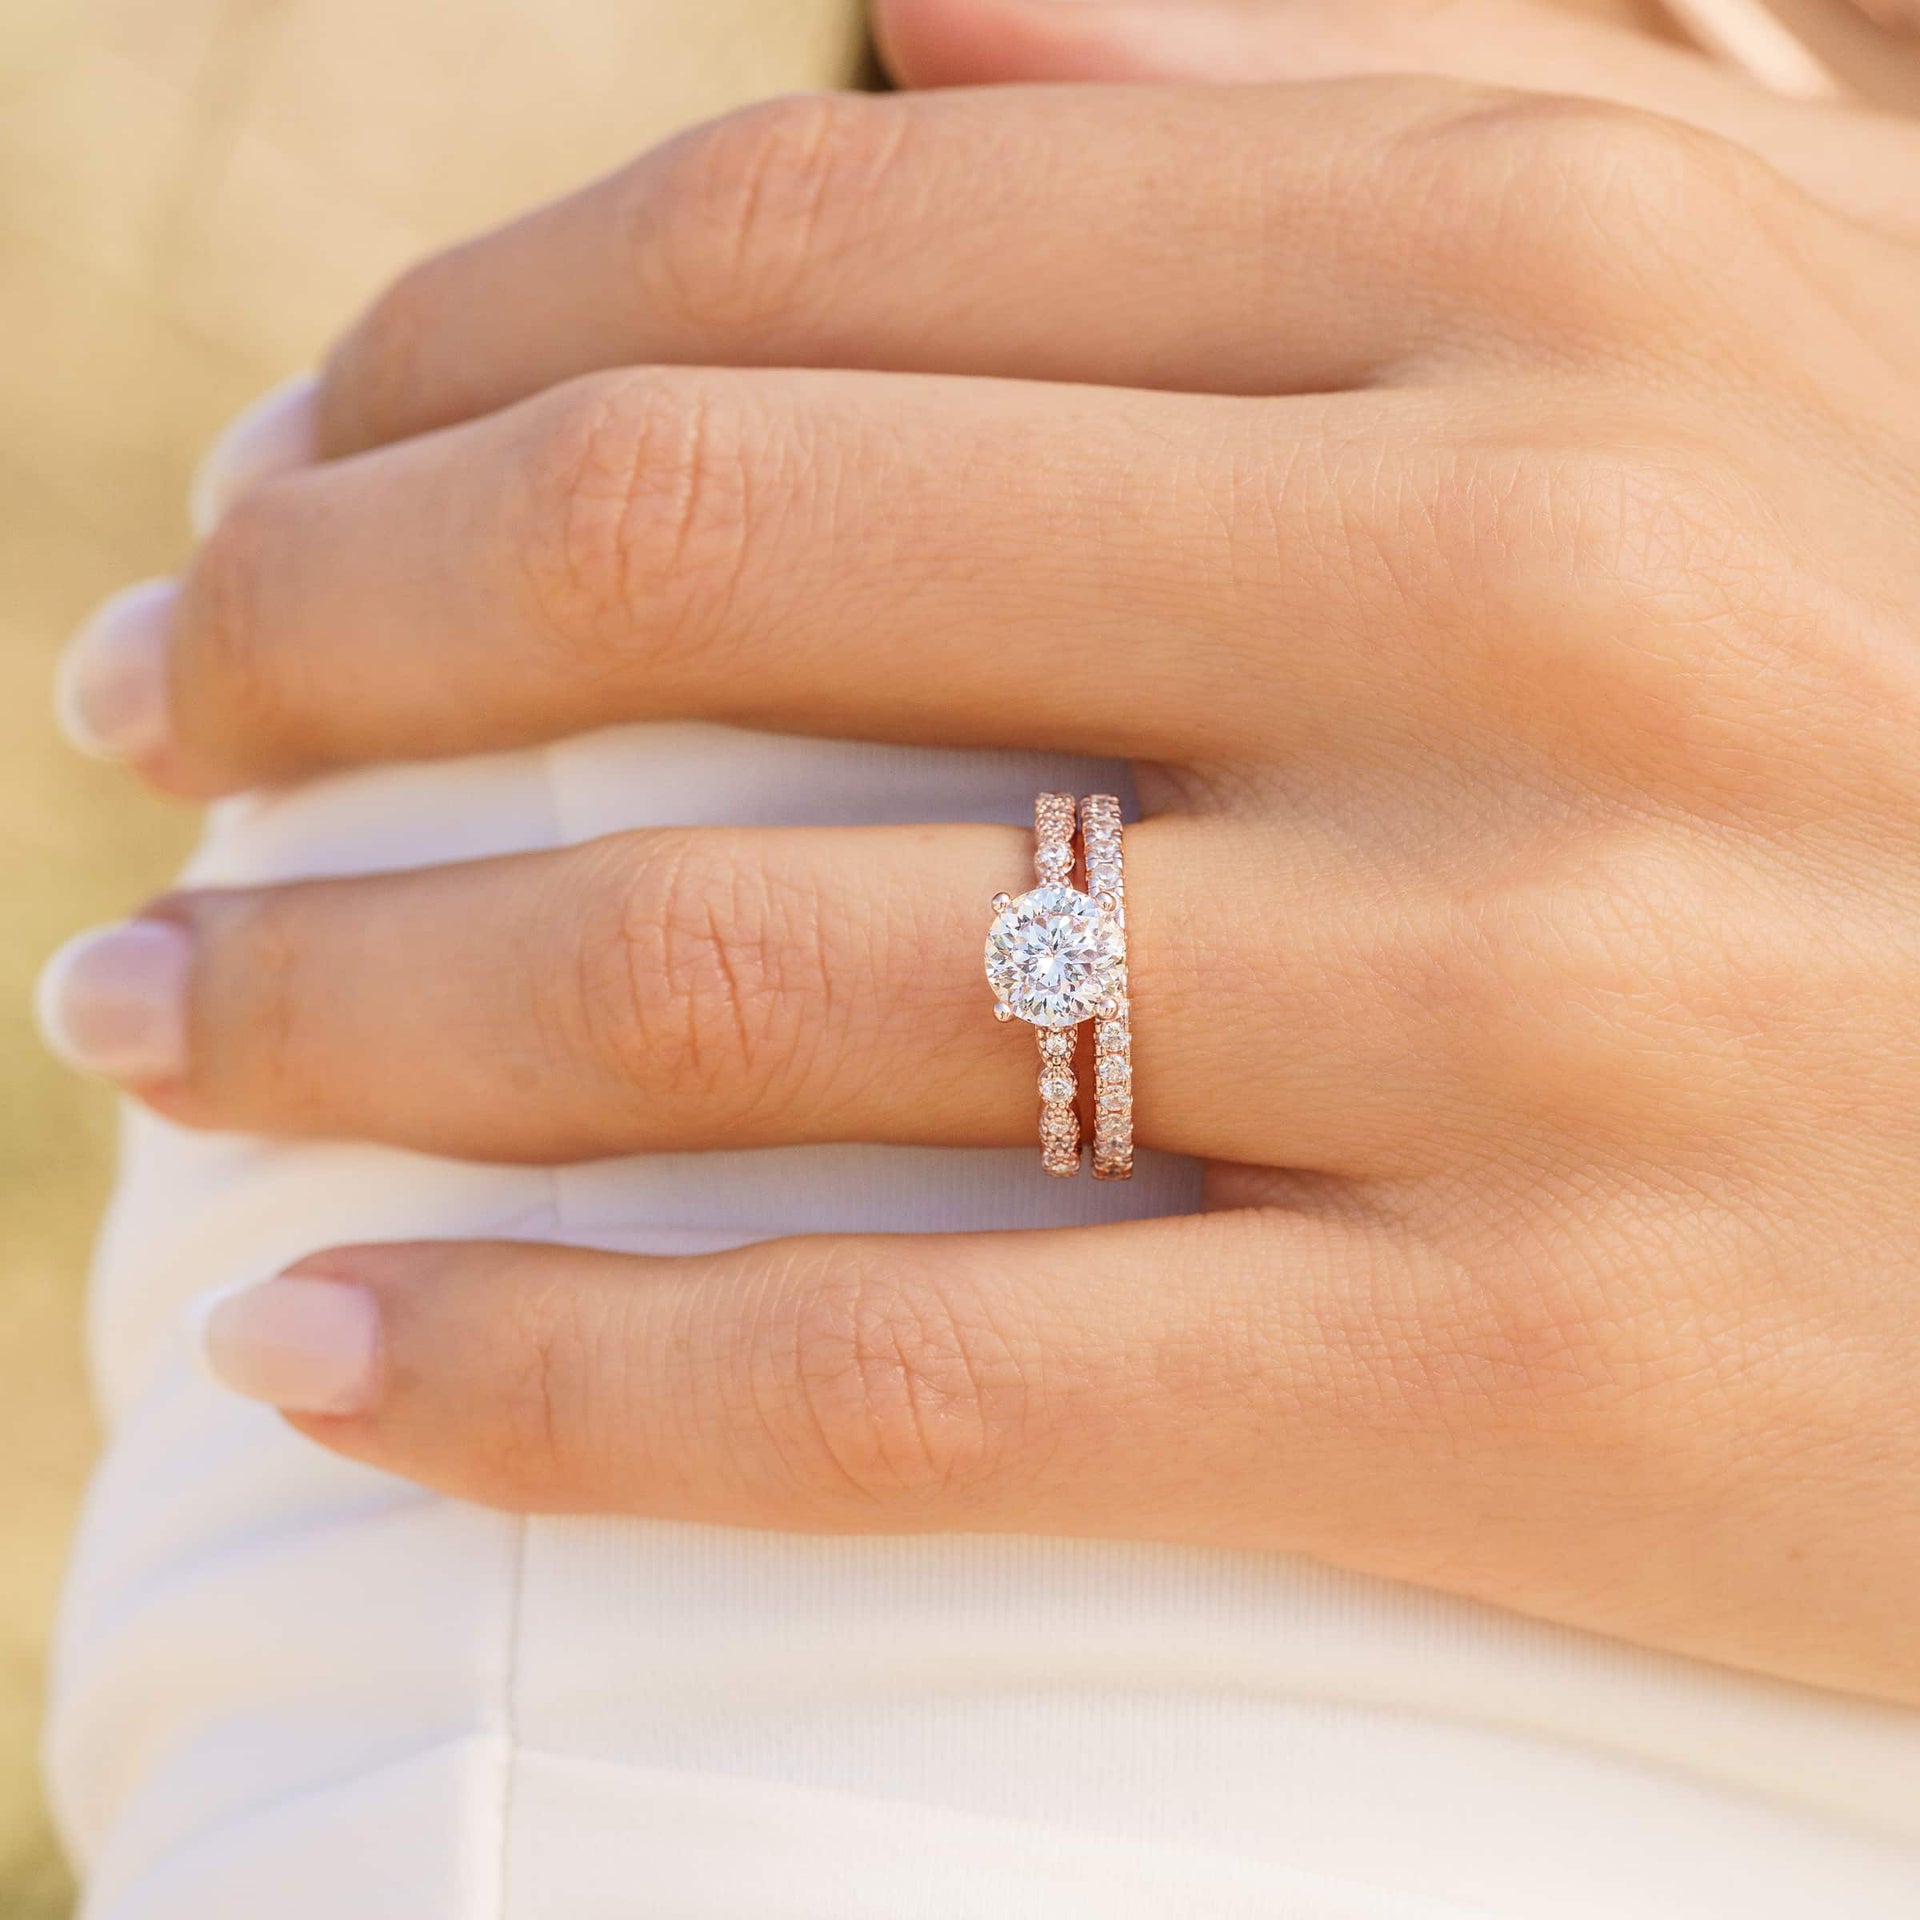 rose gold engagement ring paired with elegant wedding band